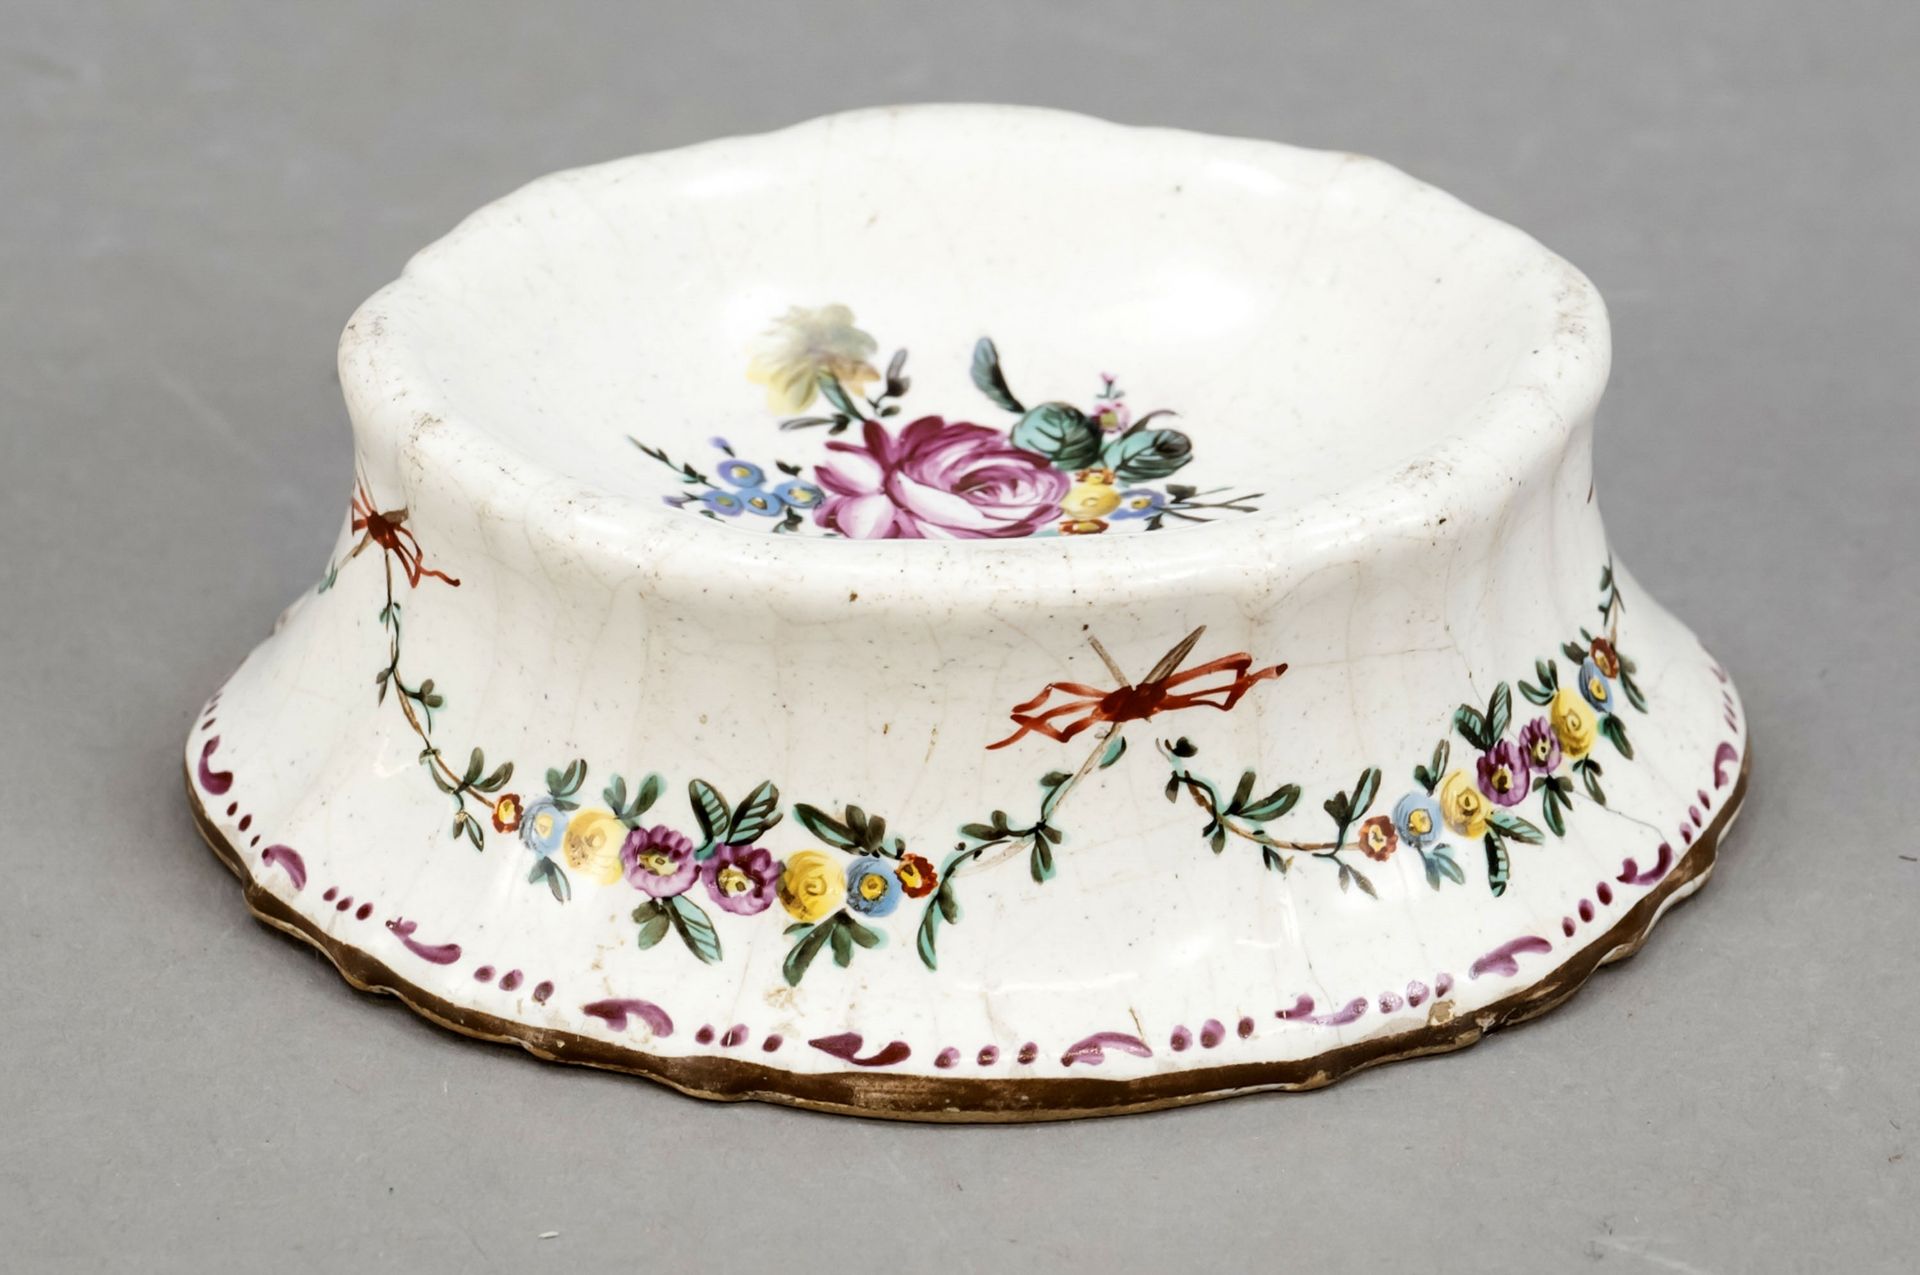 Saliere, 18th/19th century, faience, grey body with polychrome floral decoration, bumped rim, l. - Image 2 of 2